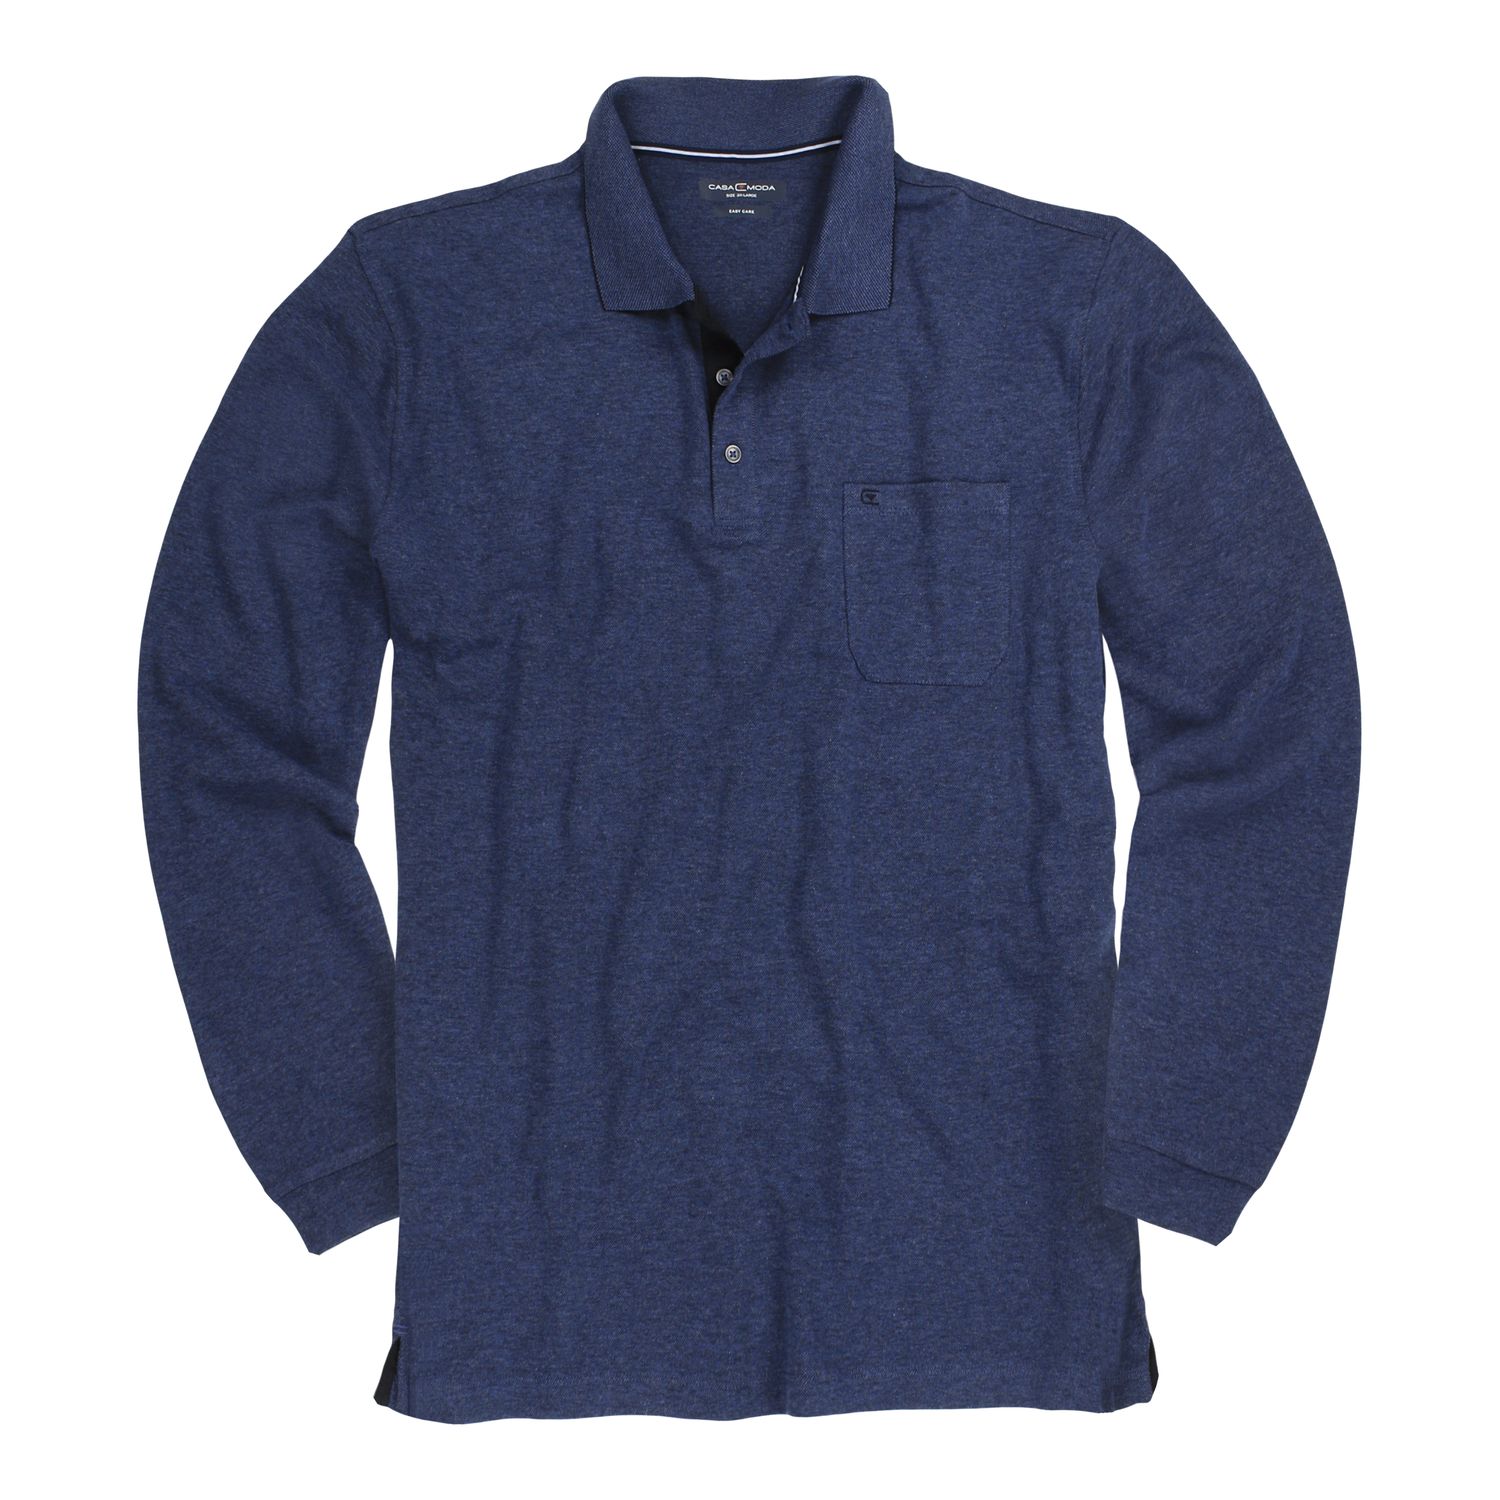 Long sleeve polo shirt in dark blue by Casamoda for men in oversizes up to 6XL